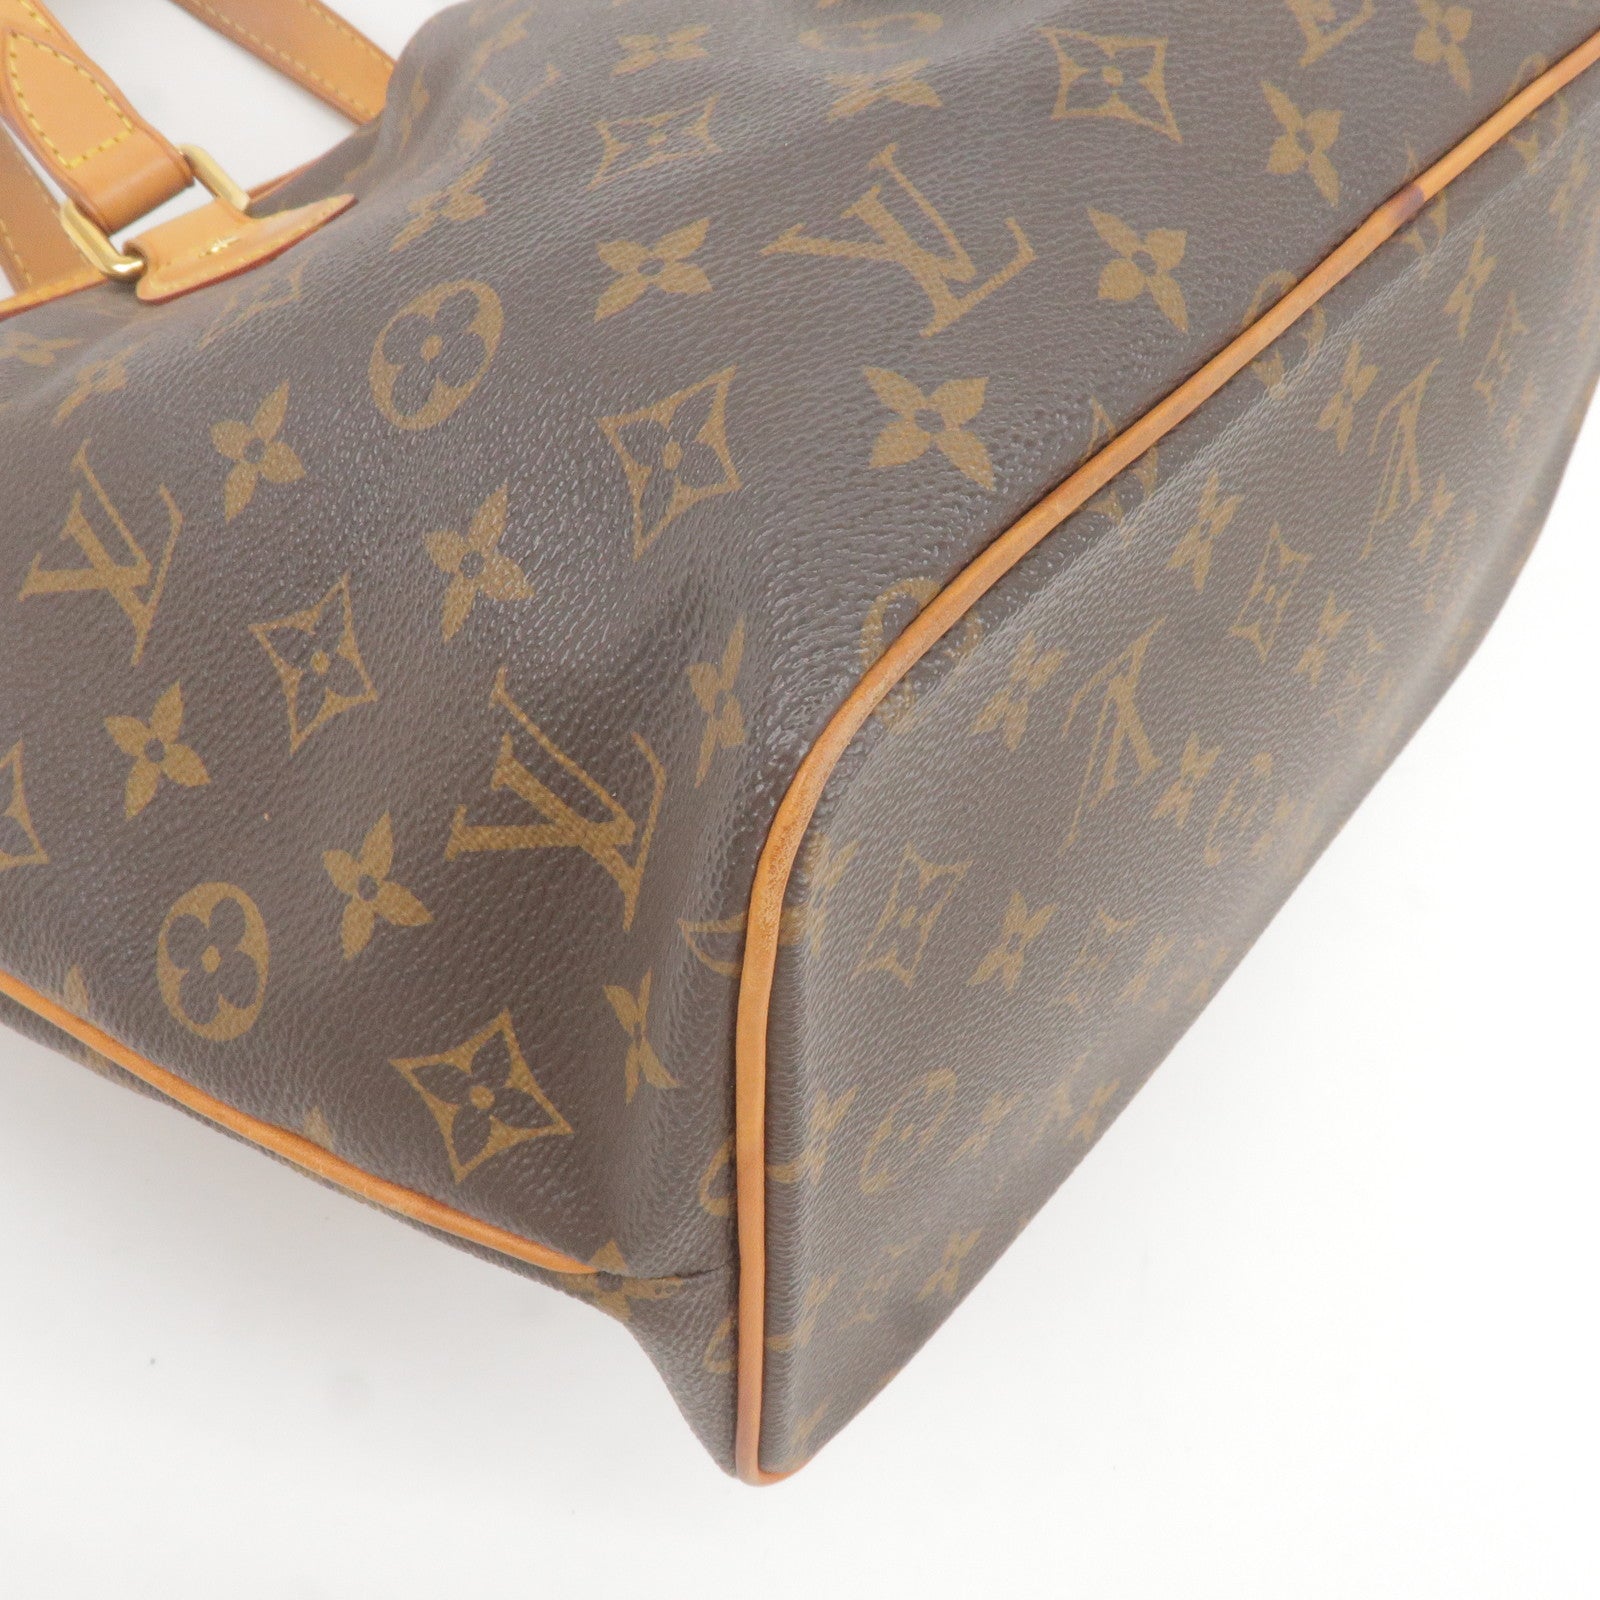 Products By Louis Vuitton: Monogram Gradient Scarf